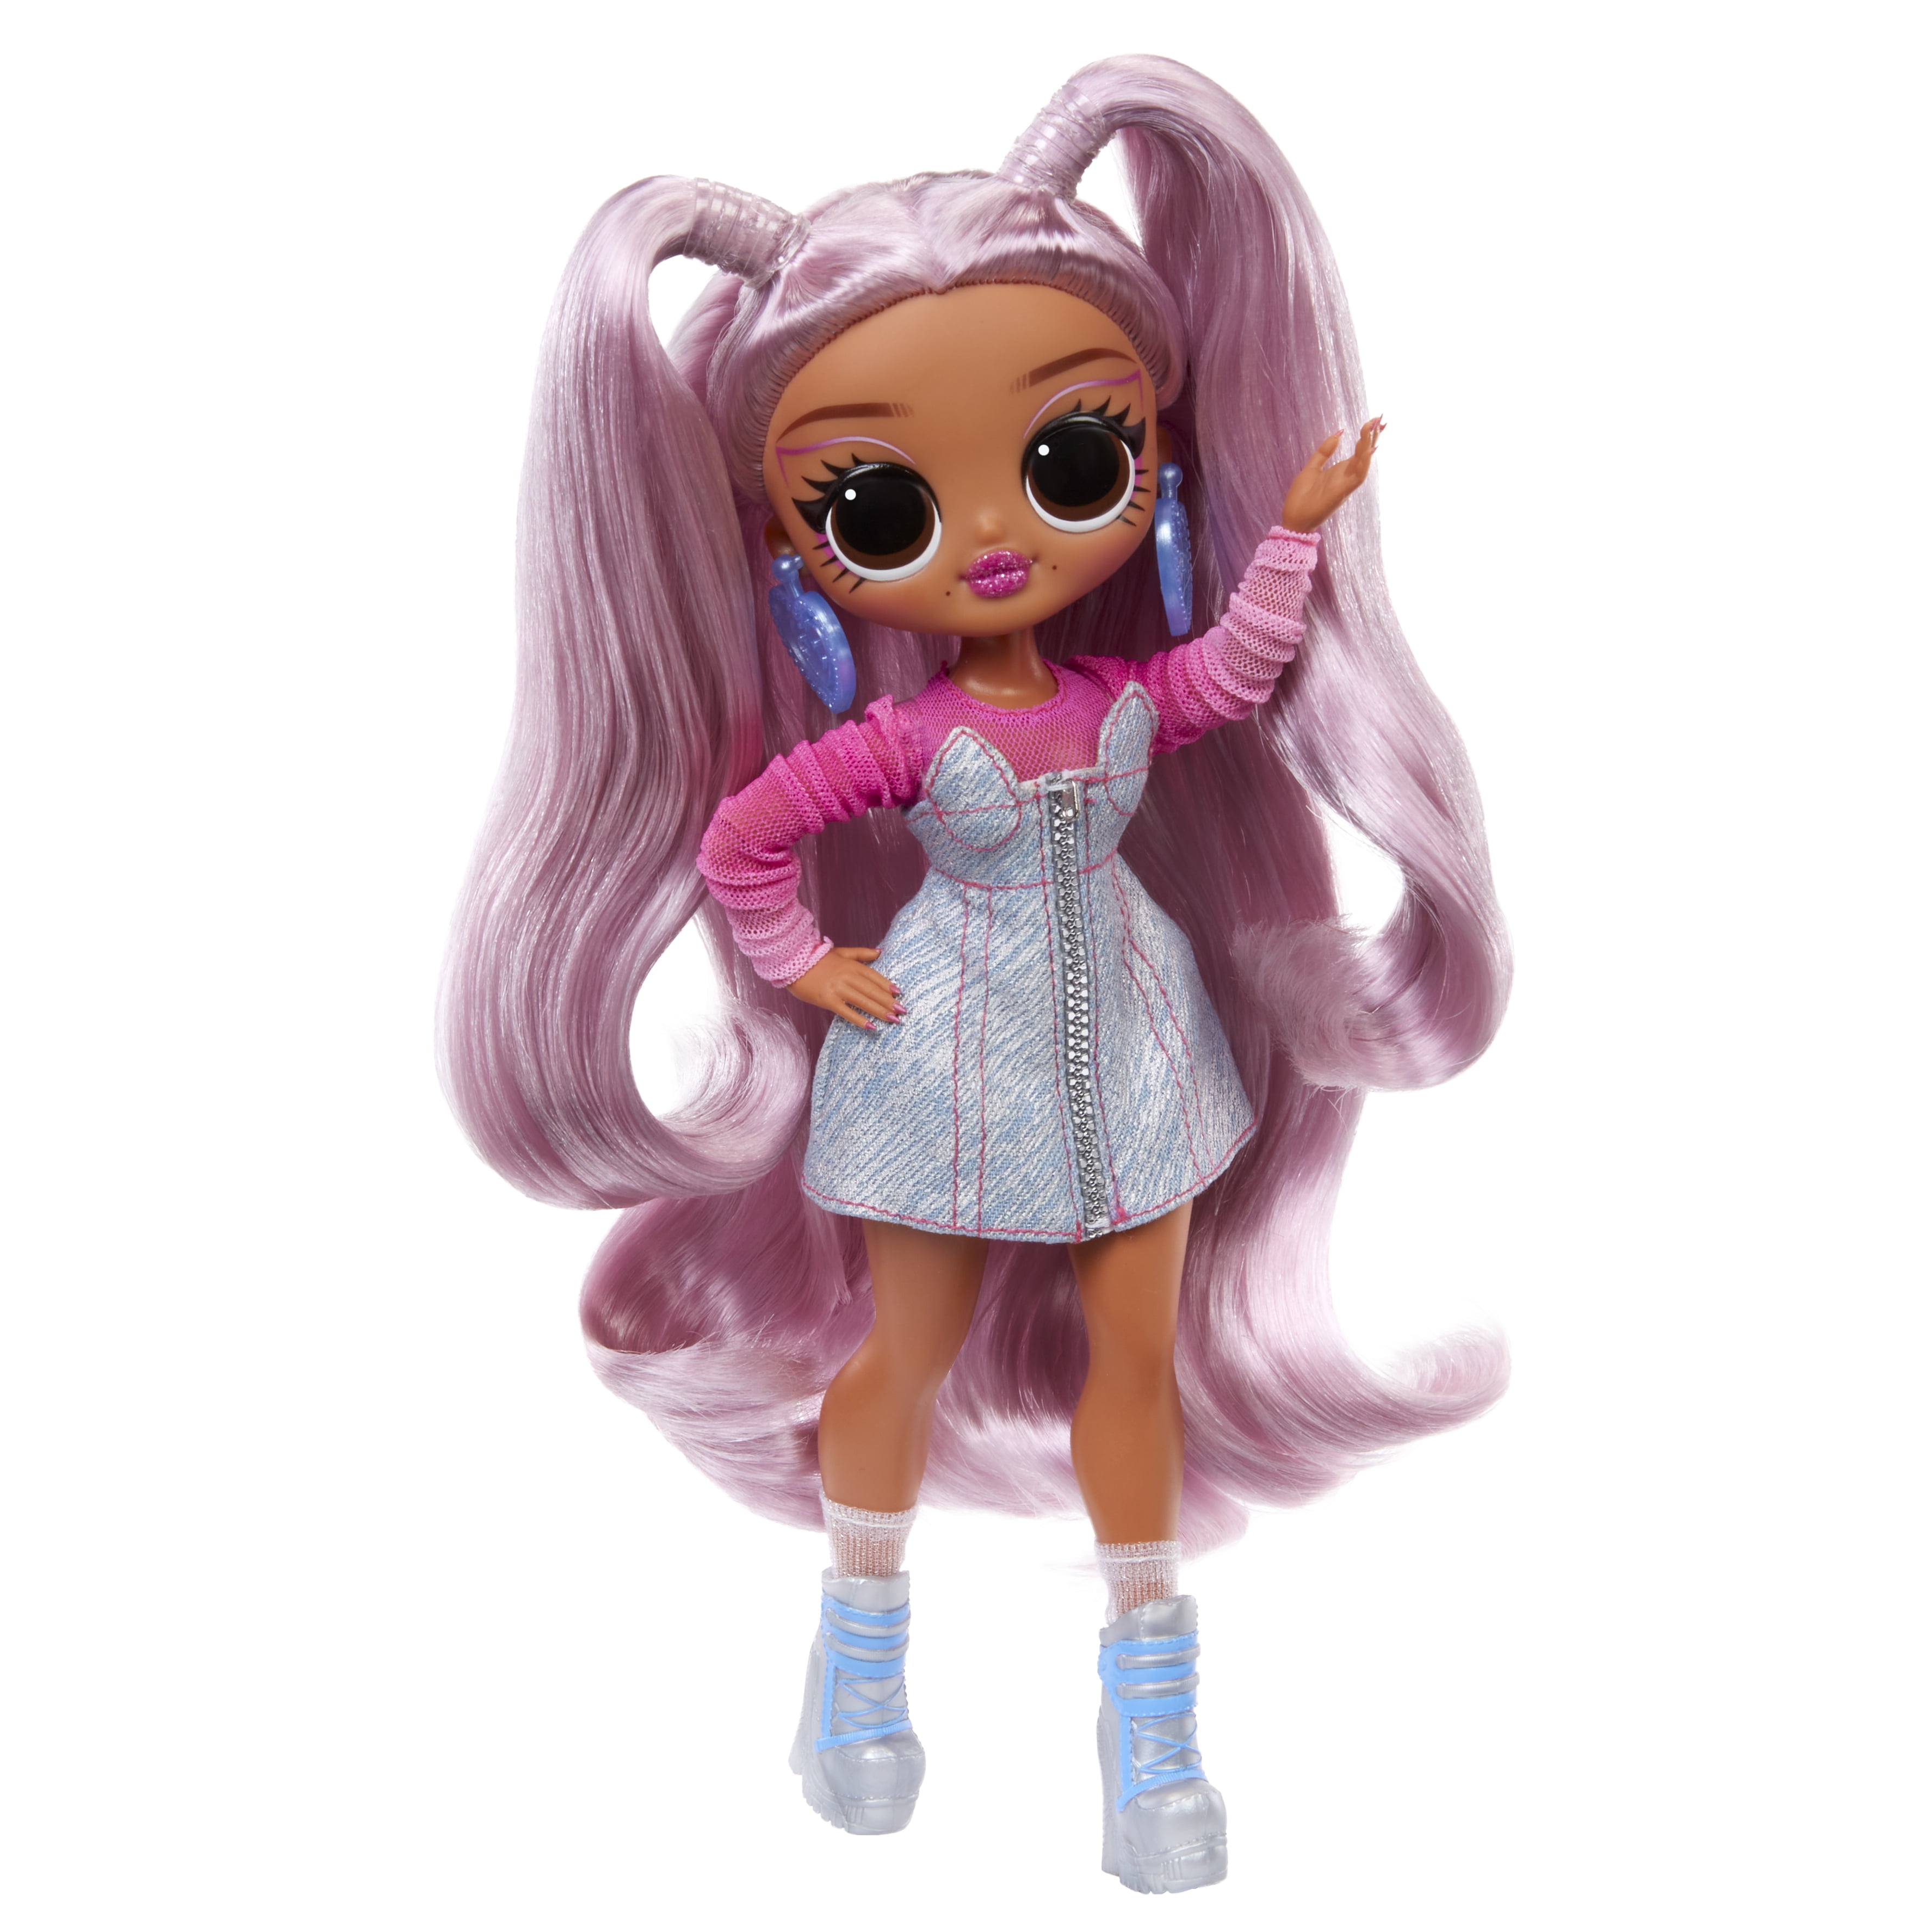 L.O.L. Surprise! OMG Style 1 Doll, 1 ct - Fry's Food Stores